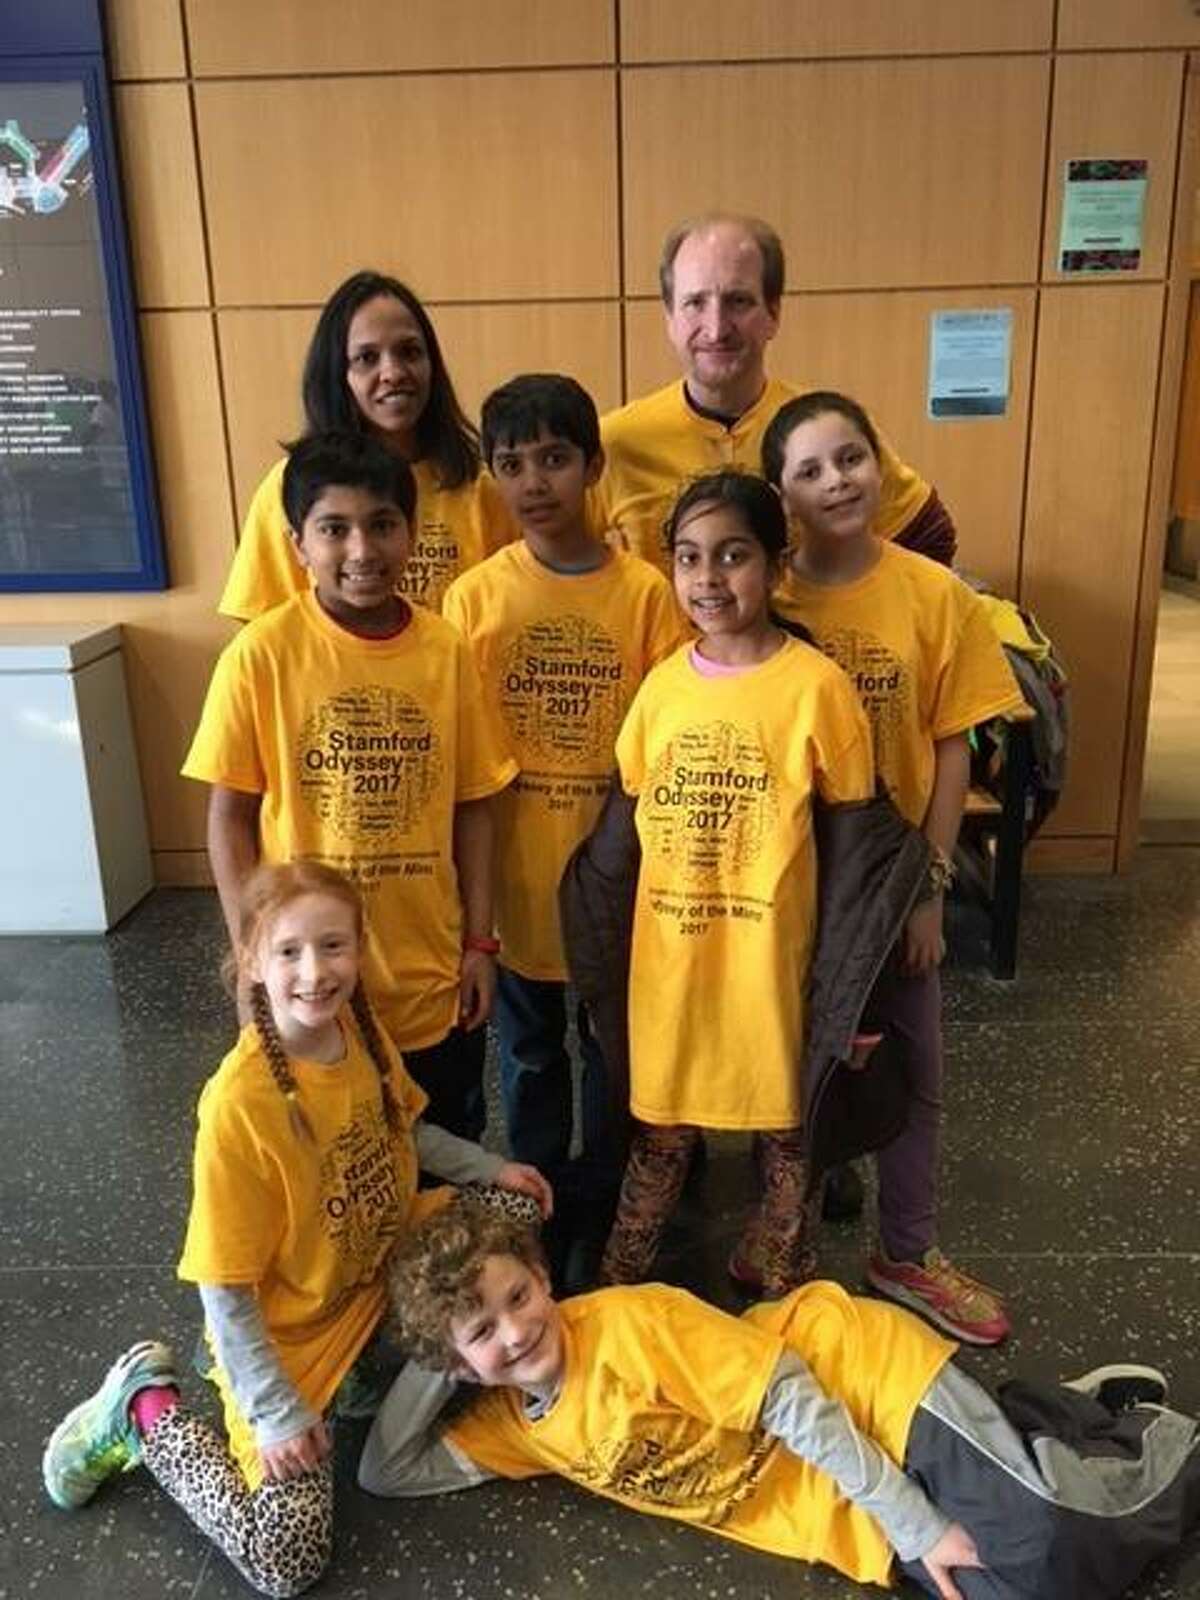 From left, coaches Rajni Chidambaram and Glenn Harper pose for a picture with Newfield Elementary School students Veeraj Shah Sidhanth Pharshy, Ananya Gupta and Riley Allyn in the second row and Alanna Harper and Wyatt Elsner in the front row during the Odyssey of the Mind statewide tournament at Southern Connecticut State University in New Haven, Conn., on March 18, 2017.